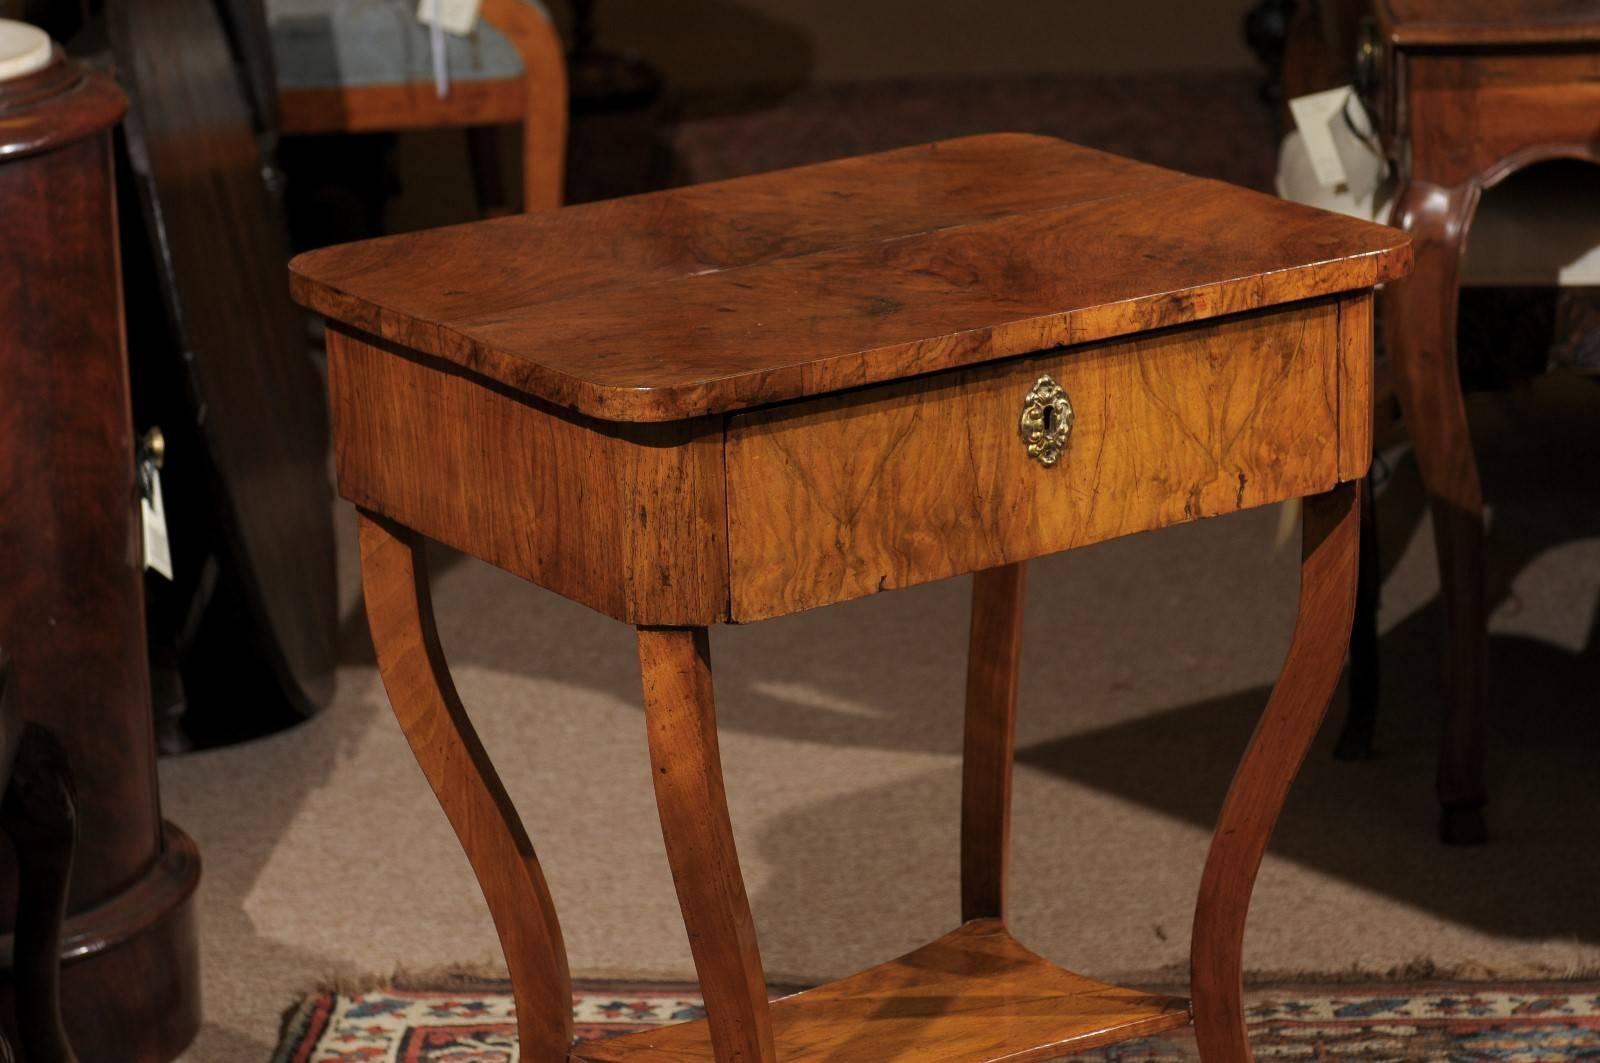 Early 19th Century Italian Walnut Table with Saber Leg and Lower Shelf 1